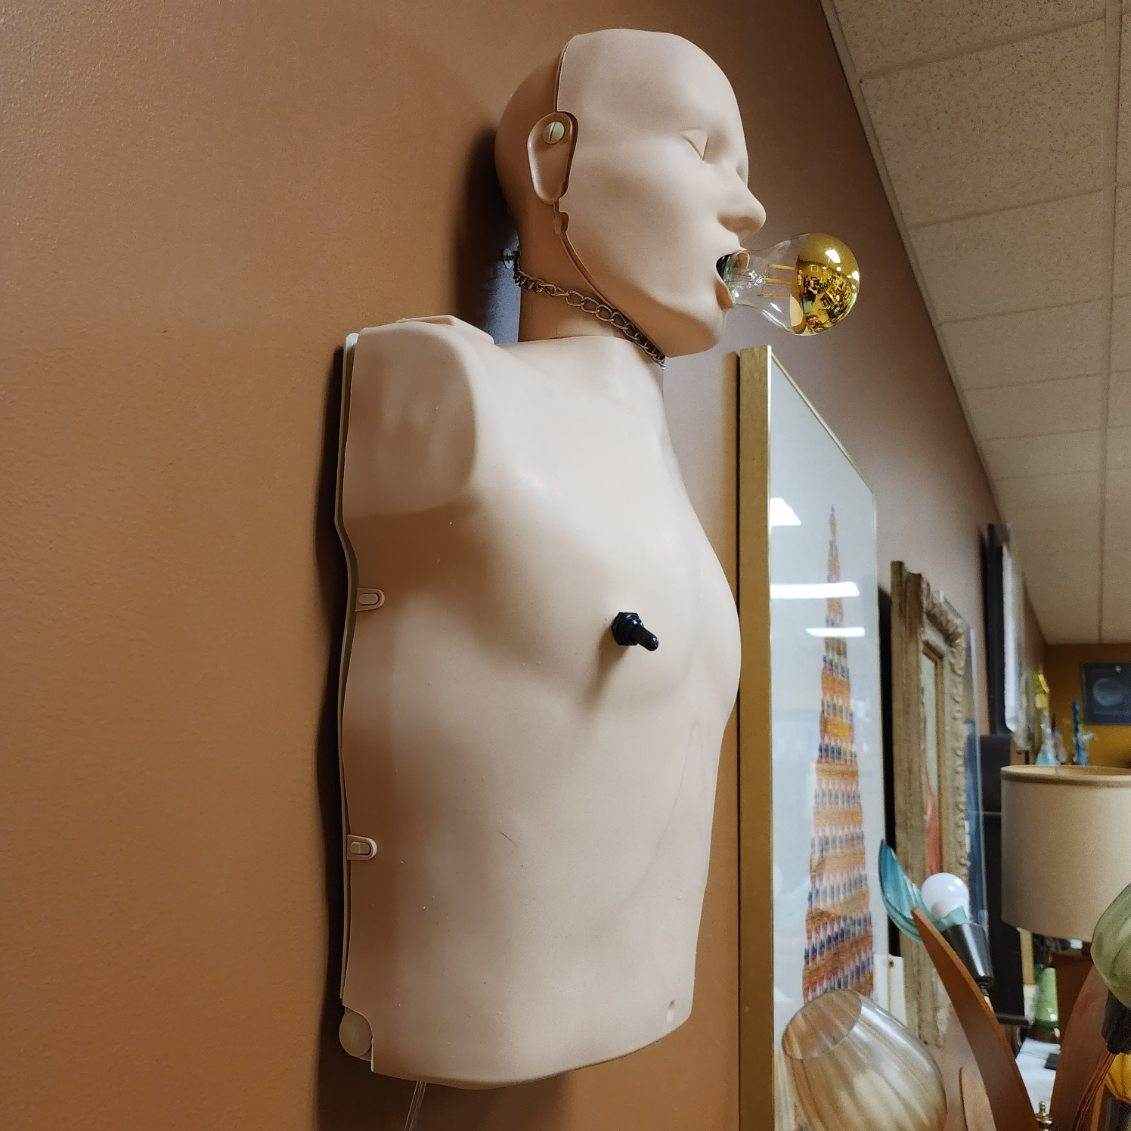 Lighted CPR Dummies Sconce Light Fixtures